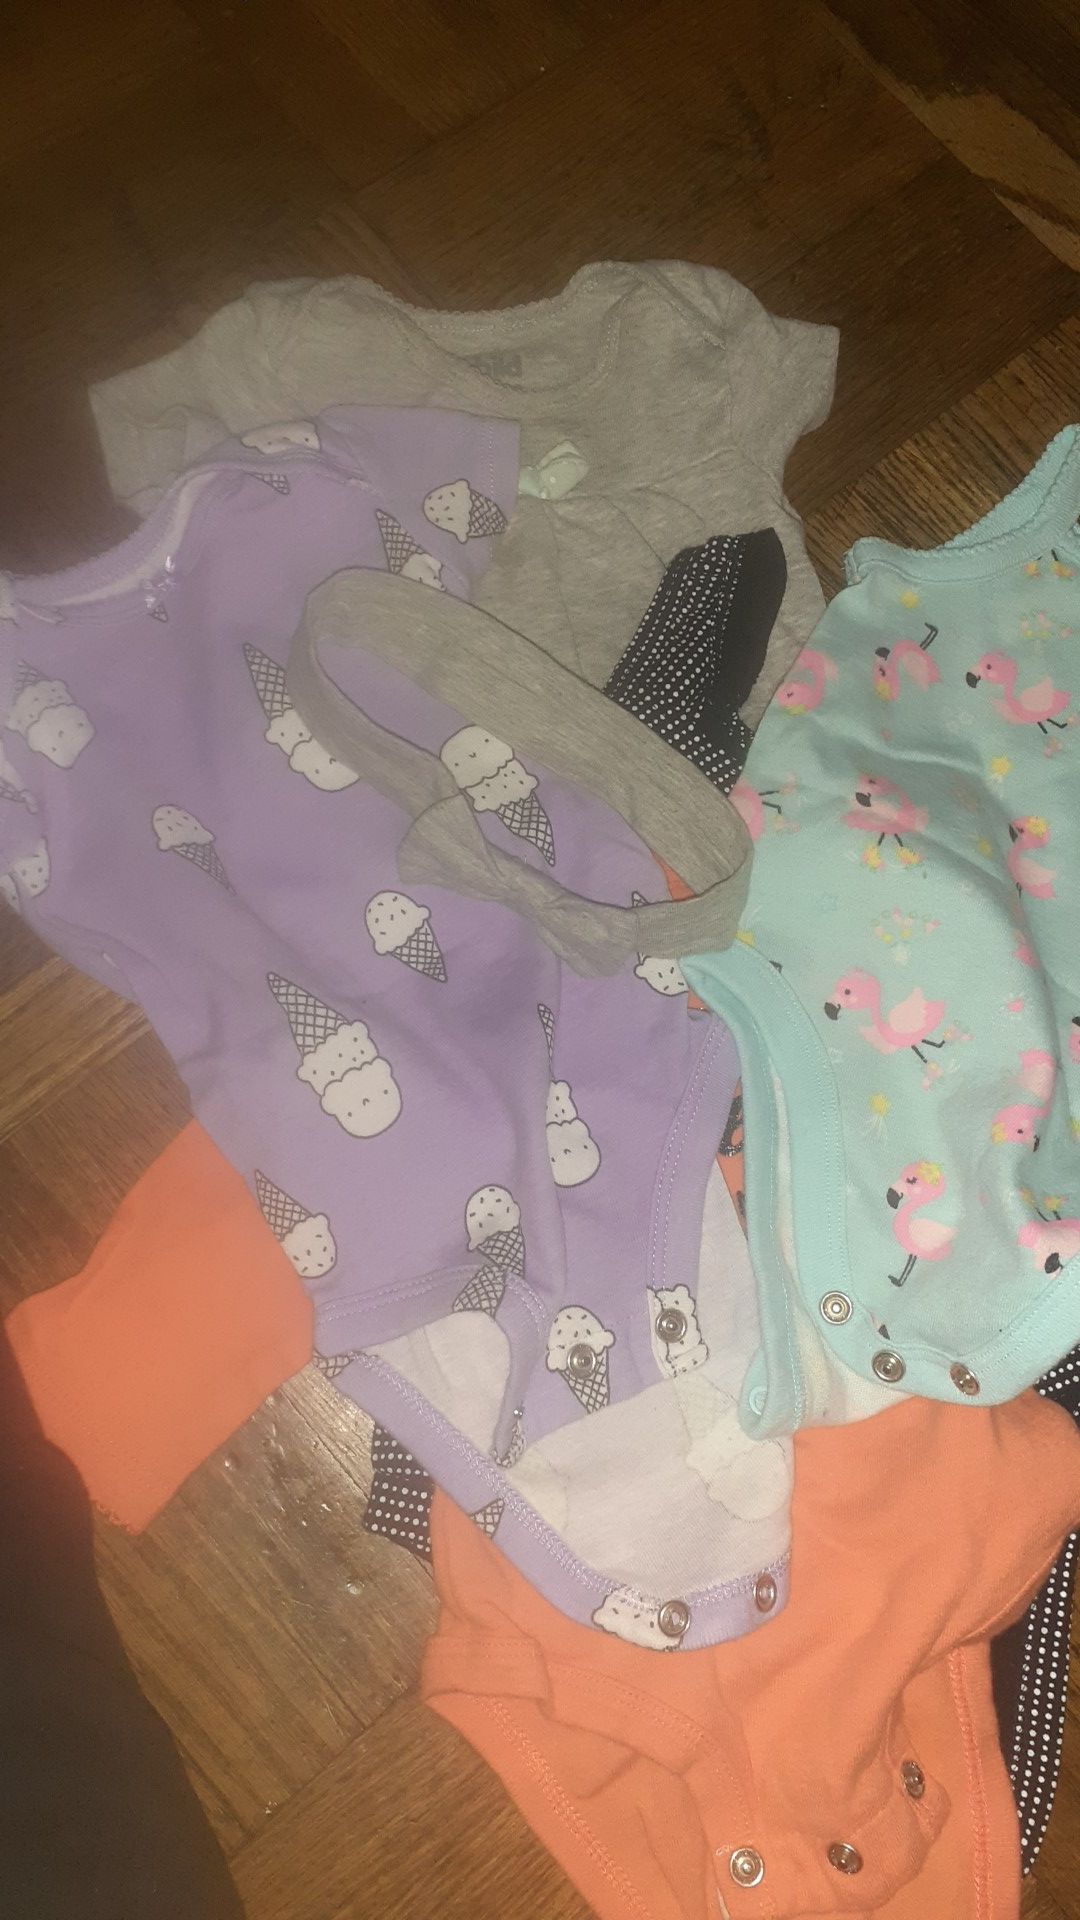 FREE BAG OF BABY GIRL CLOTHES